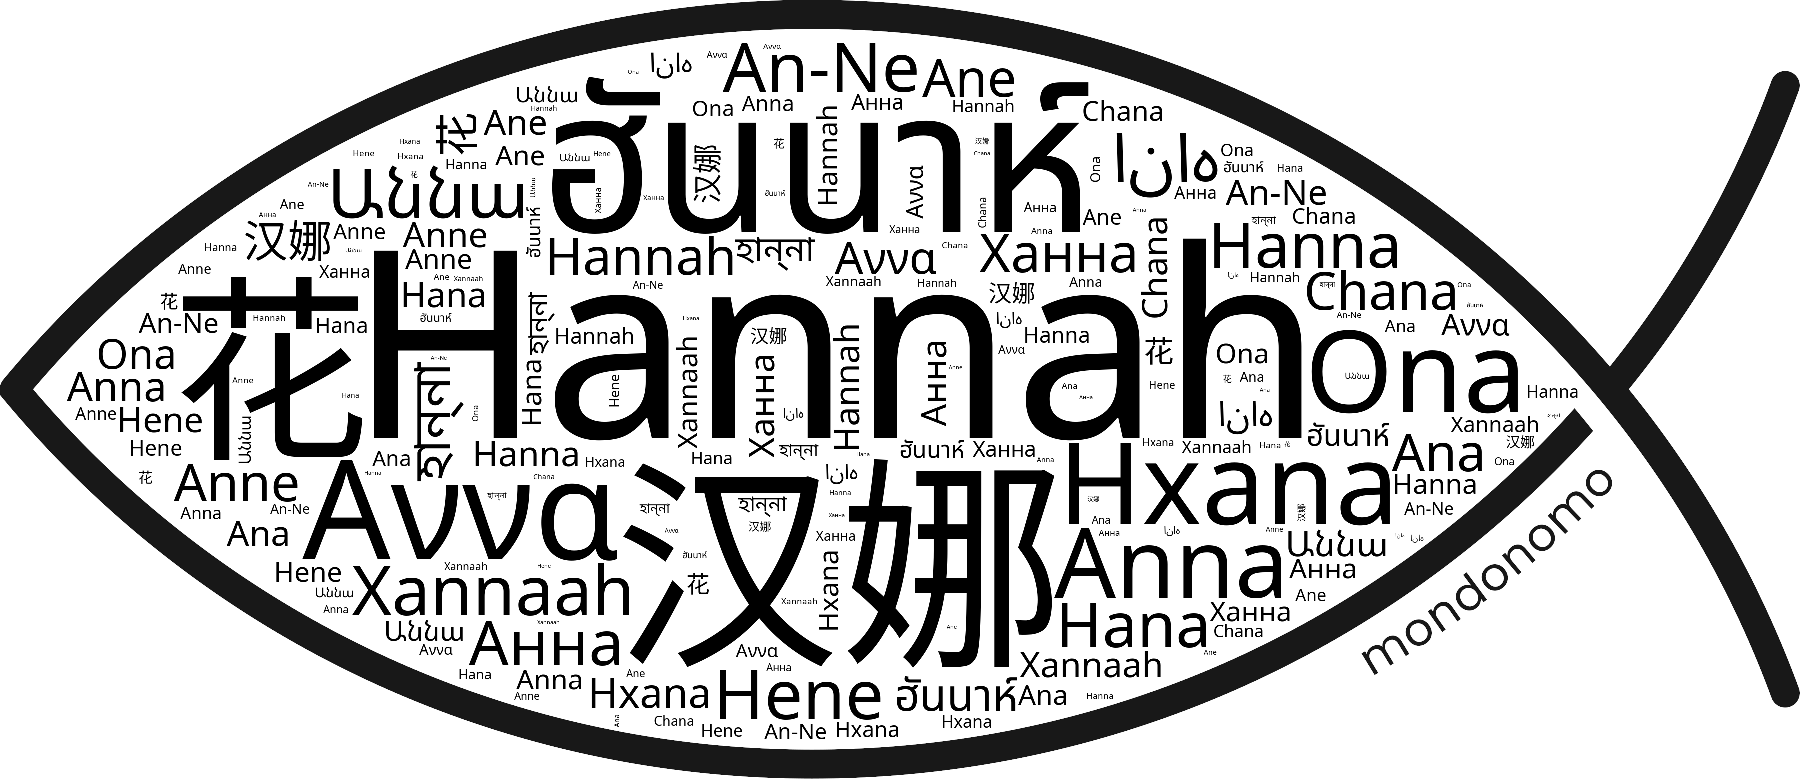 Name Hannah in the world's Bibles